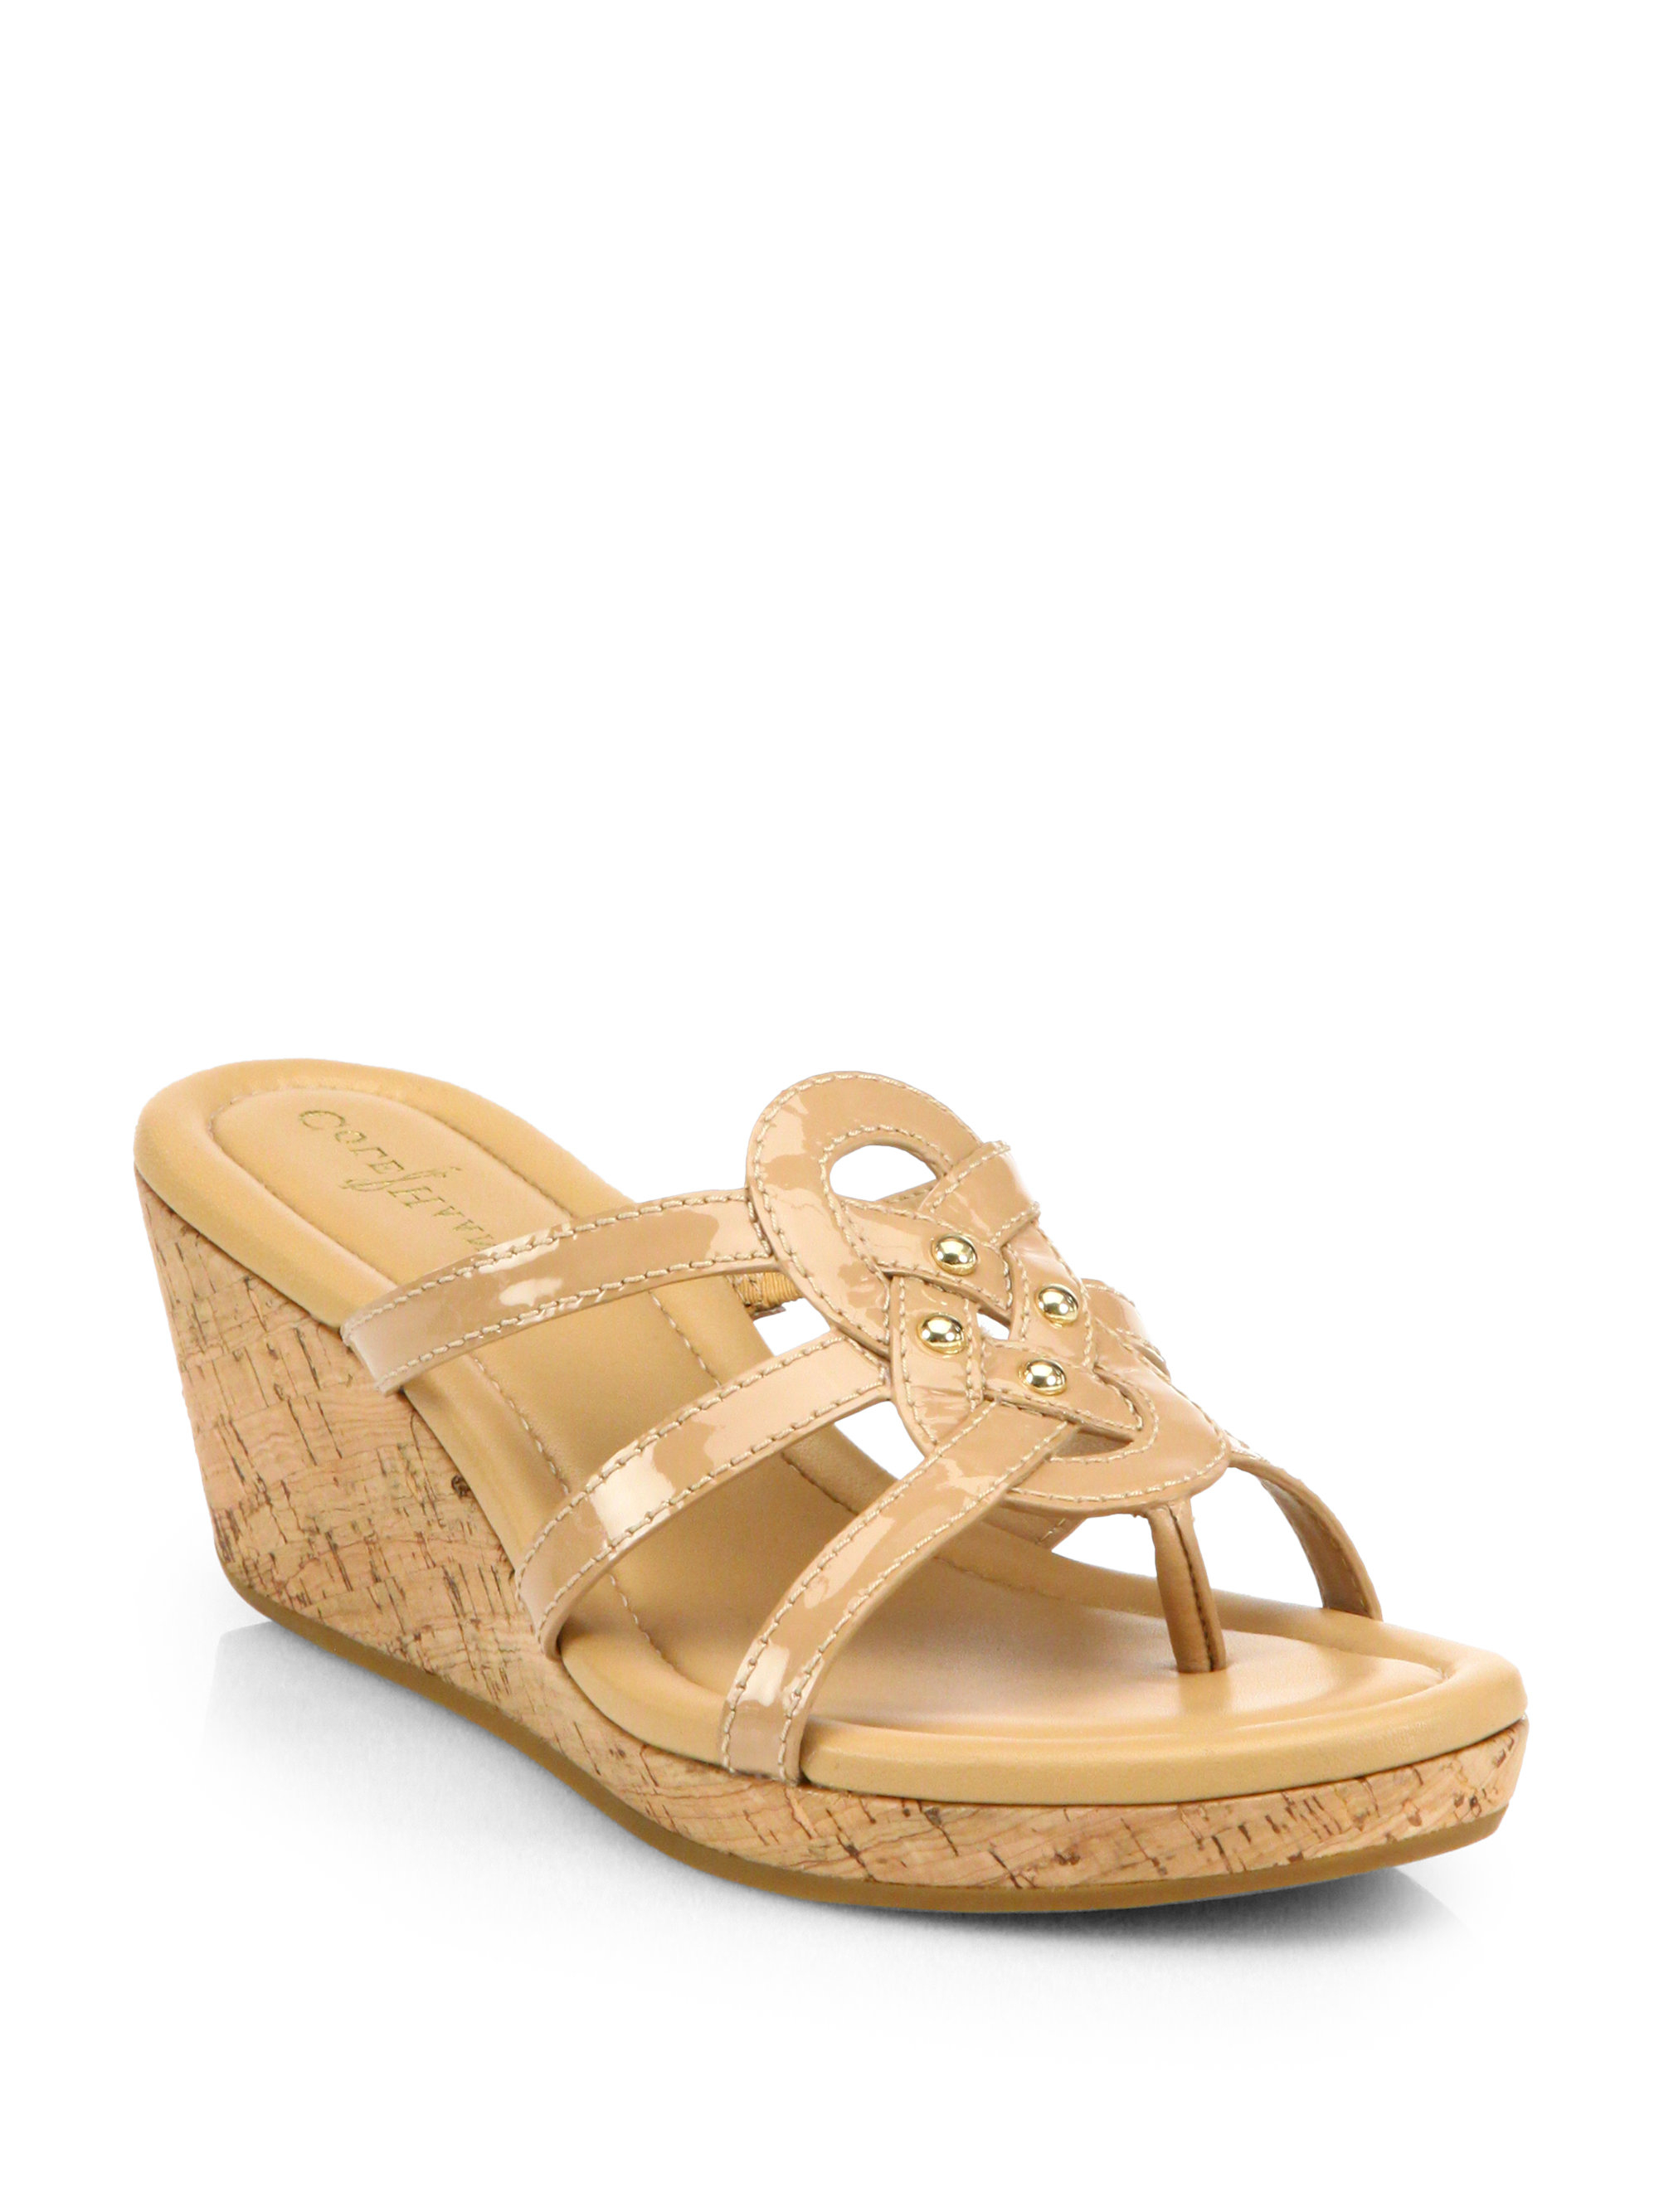 Lyst - Cole Haan Shalya Patent Leather Cork Wedge Sandals in Natural